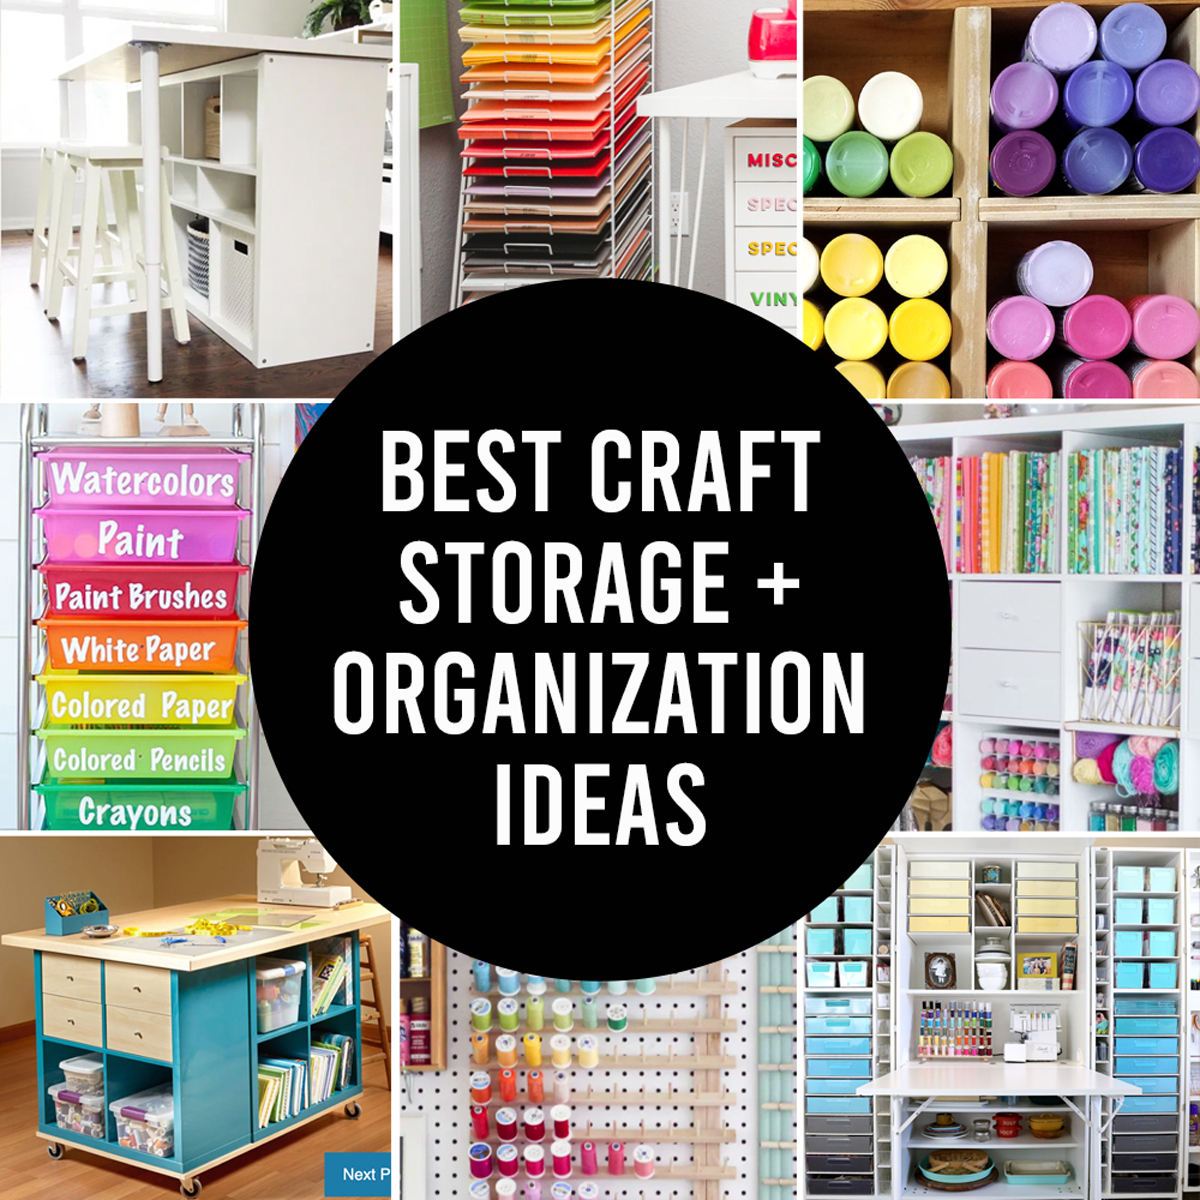 How To Organize Craft Supplies - The Organized Mama